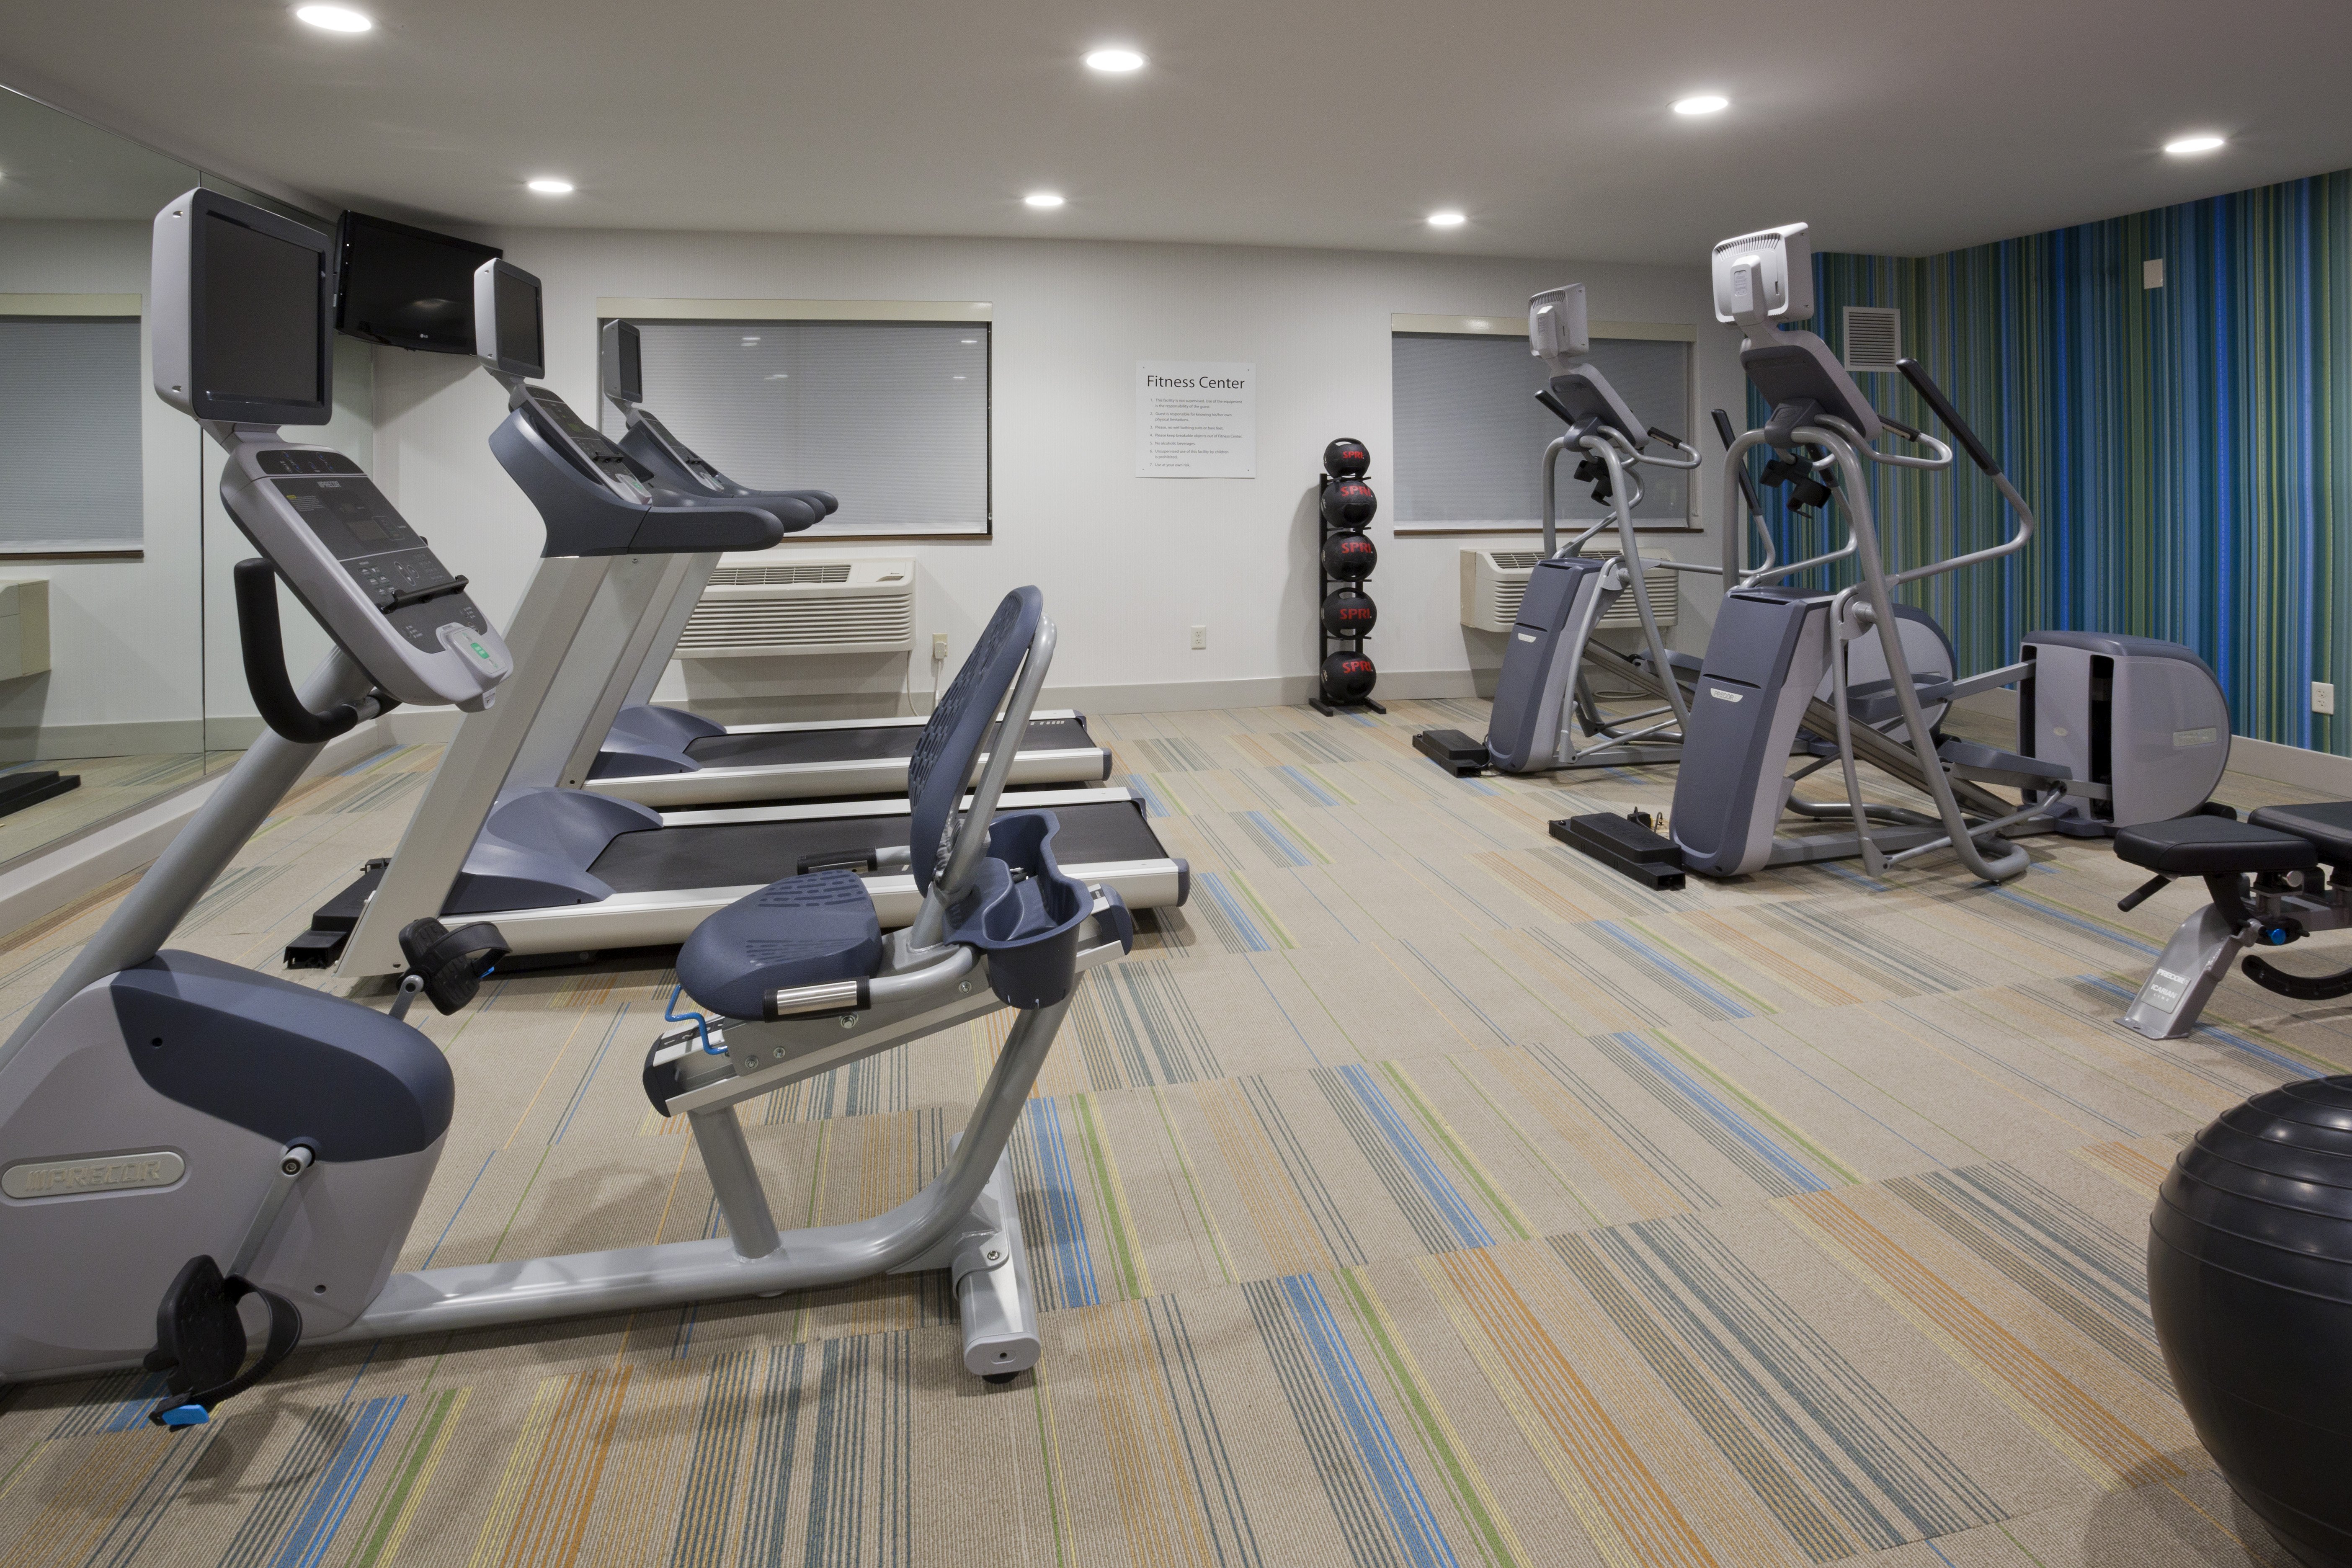 Minneapolis Hotel workout room with cardio equipment and weights